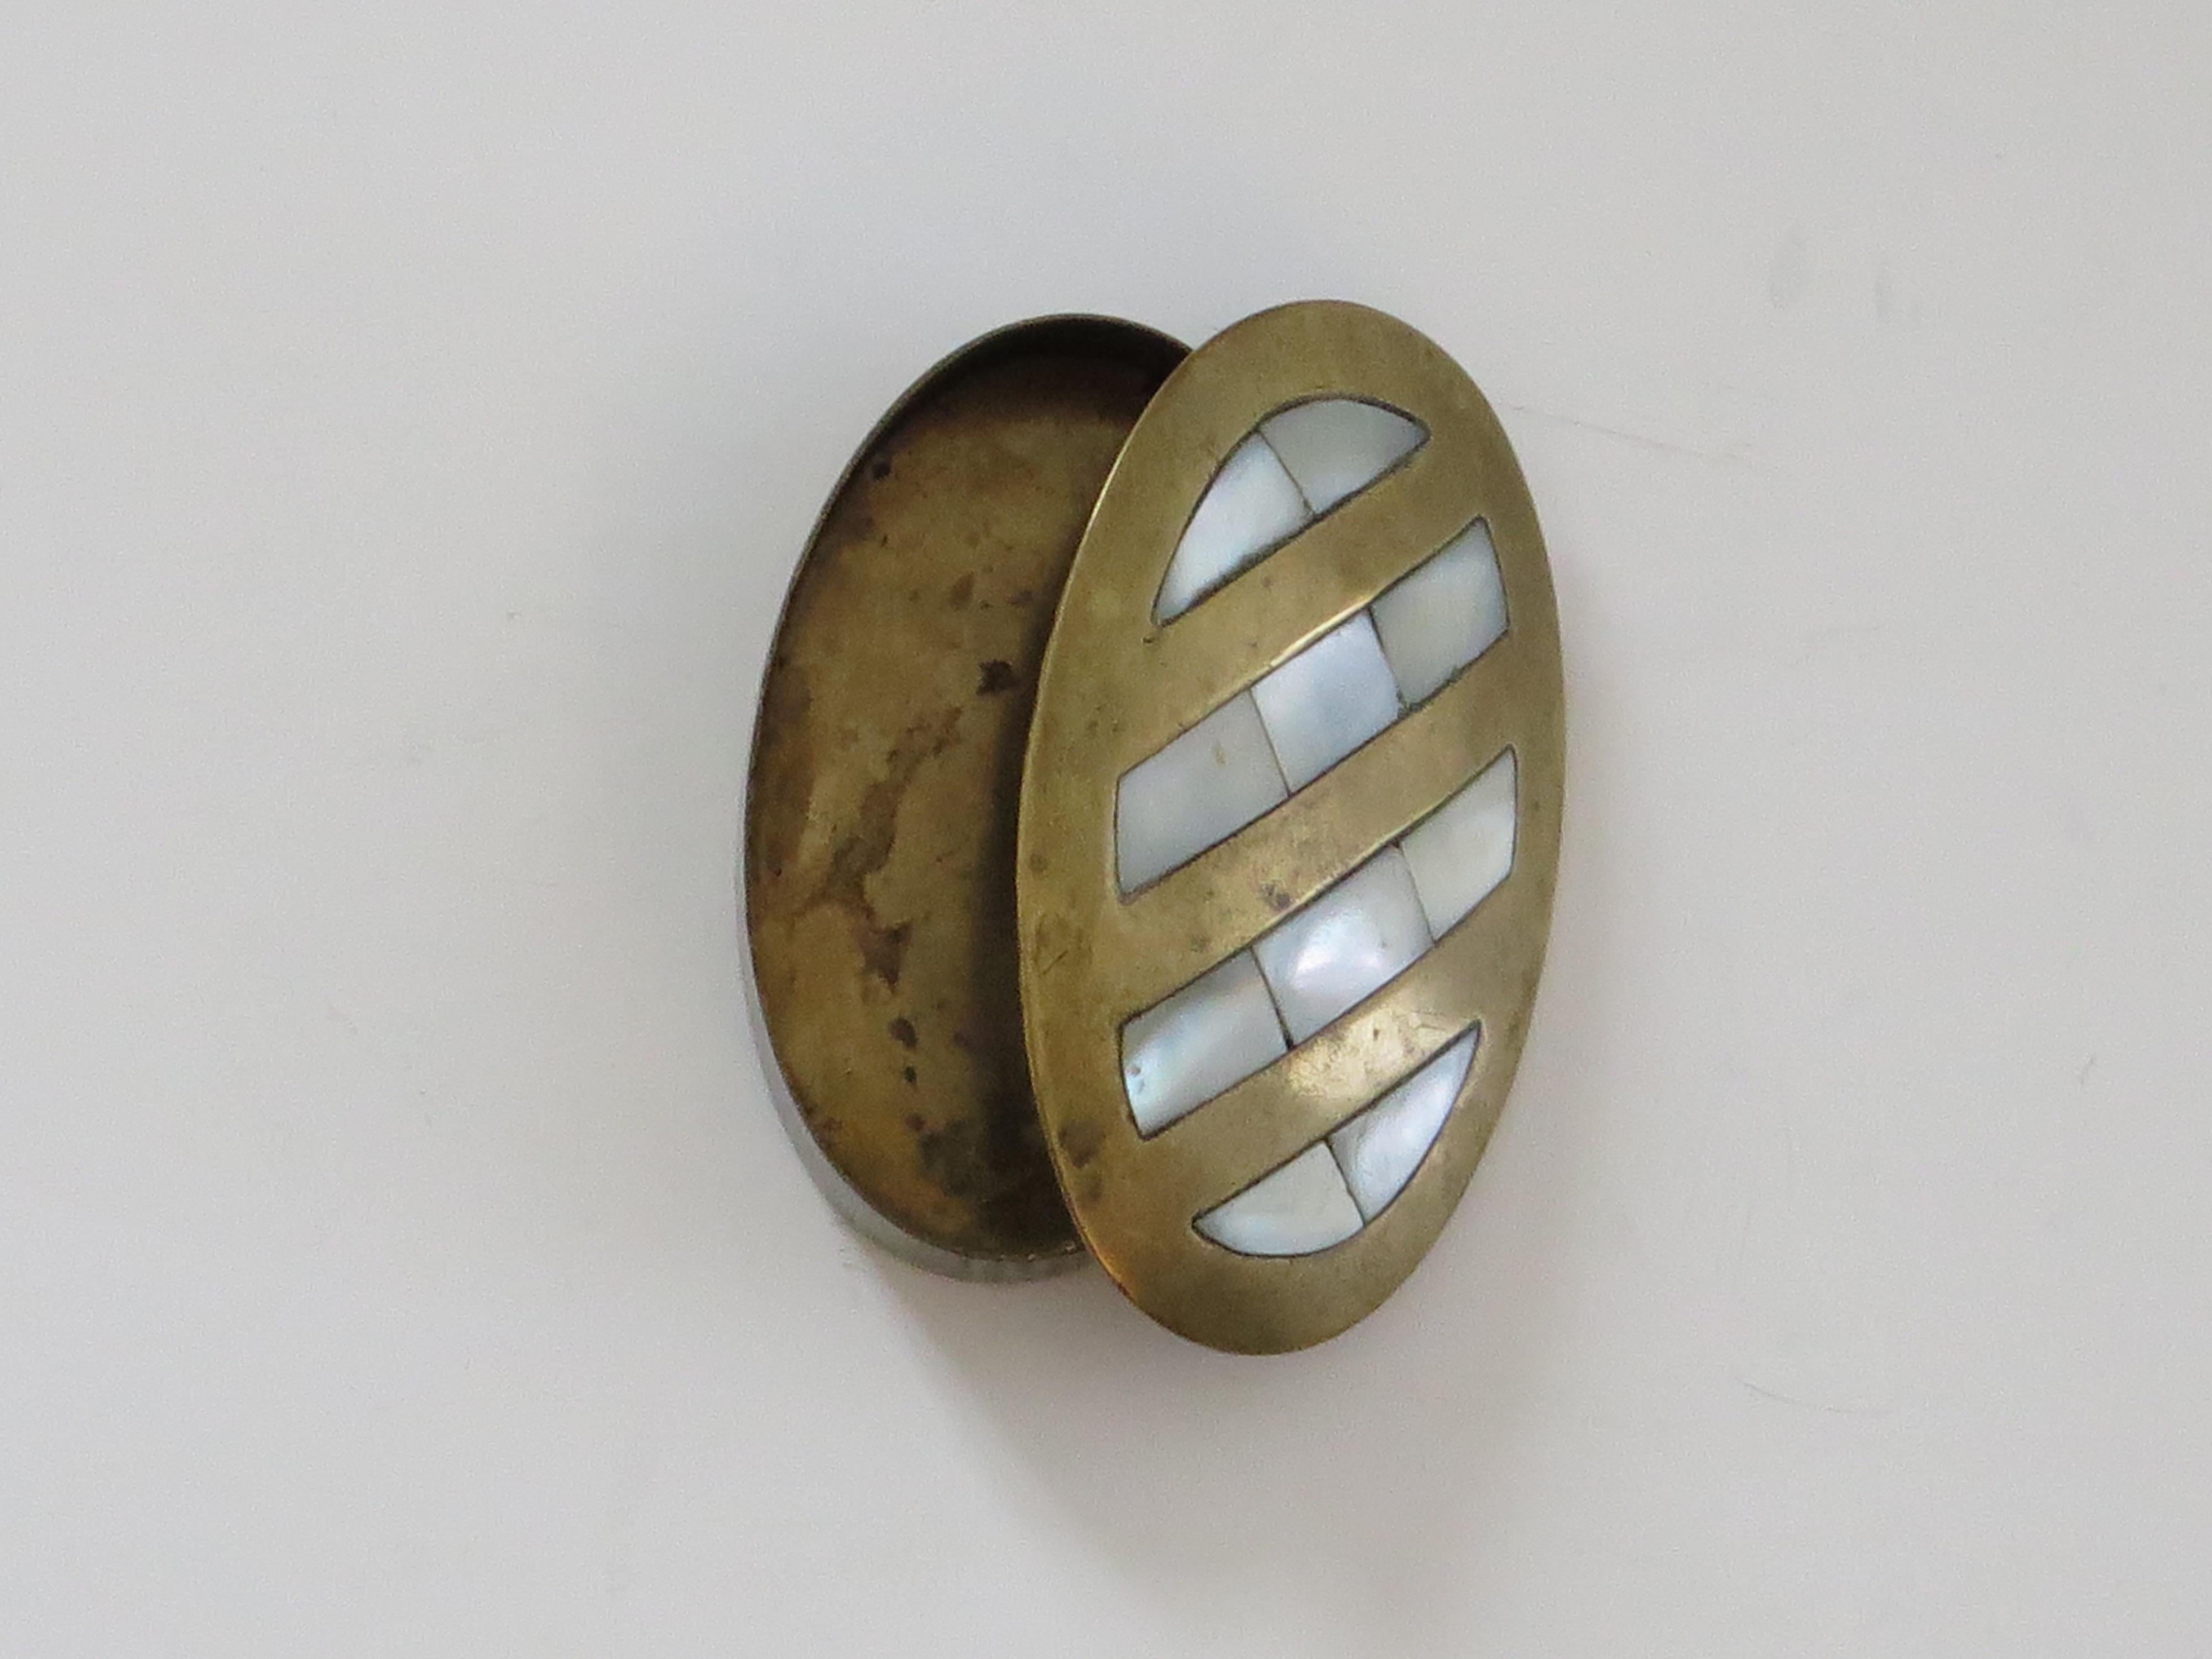 This is a small oval shaped antique metal Pill Box with Mother-of Pearl Inlay dating to the Edwardian or late Victorian period.

The box is made of bronze / brass as an oval shape with a lid that is slightly curved to the top. The lid top has